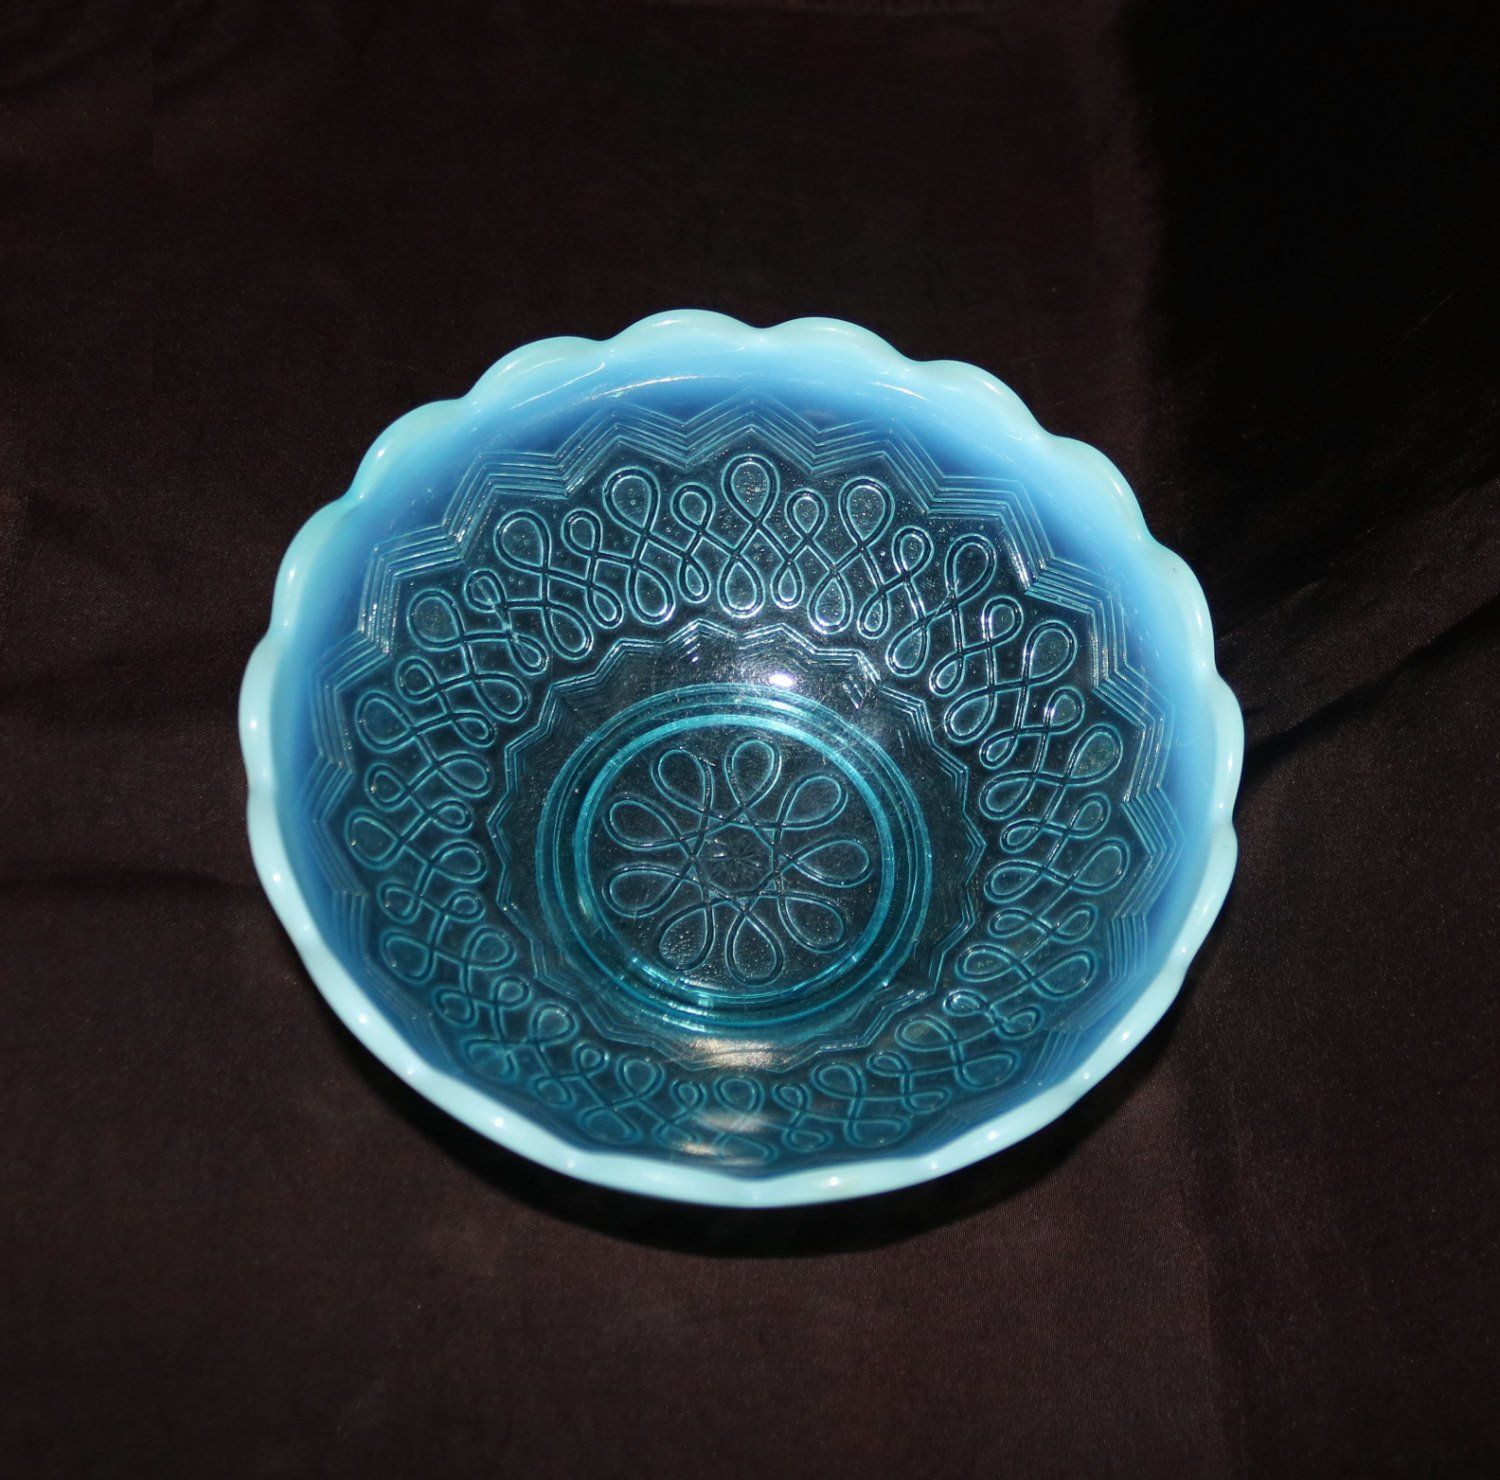 29 Lovable Teal Vases and Bowls 2024 free download teal vases and bowls of 37 fenton blue glass vase the weekly world with regard to antique handmade jefferson glass co blue opalescent many loops